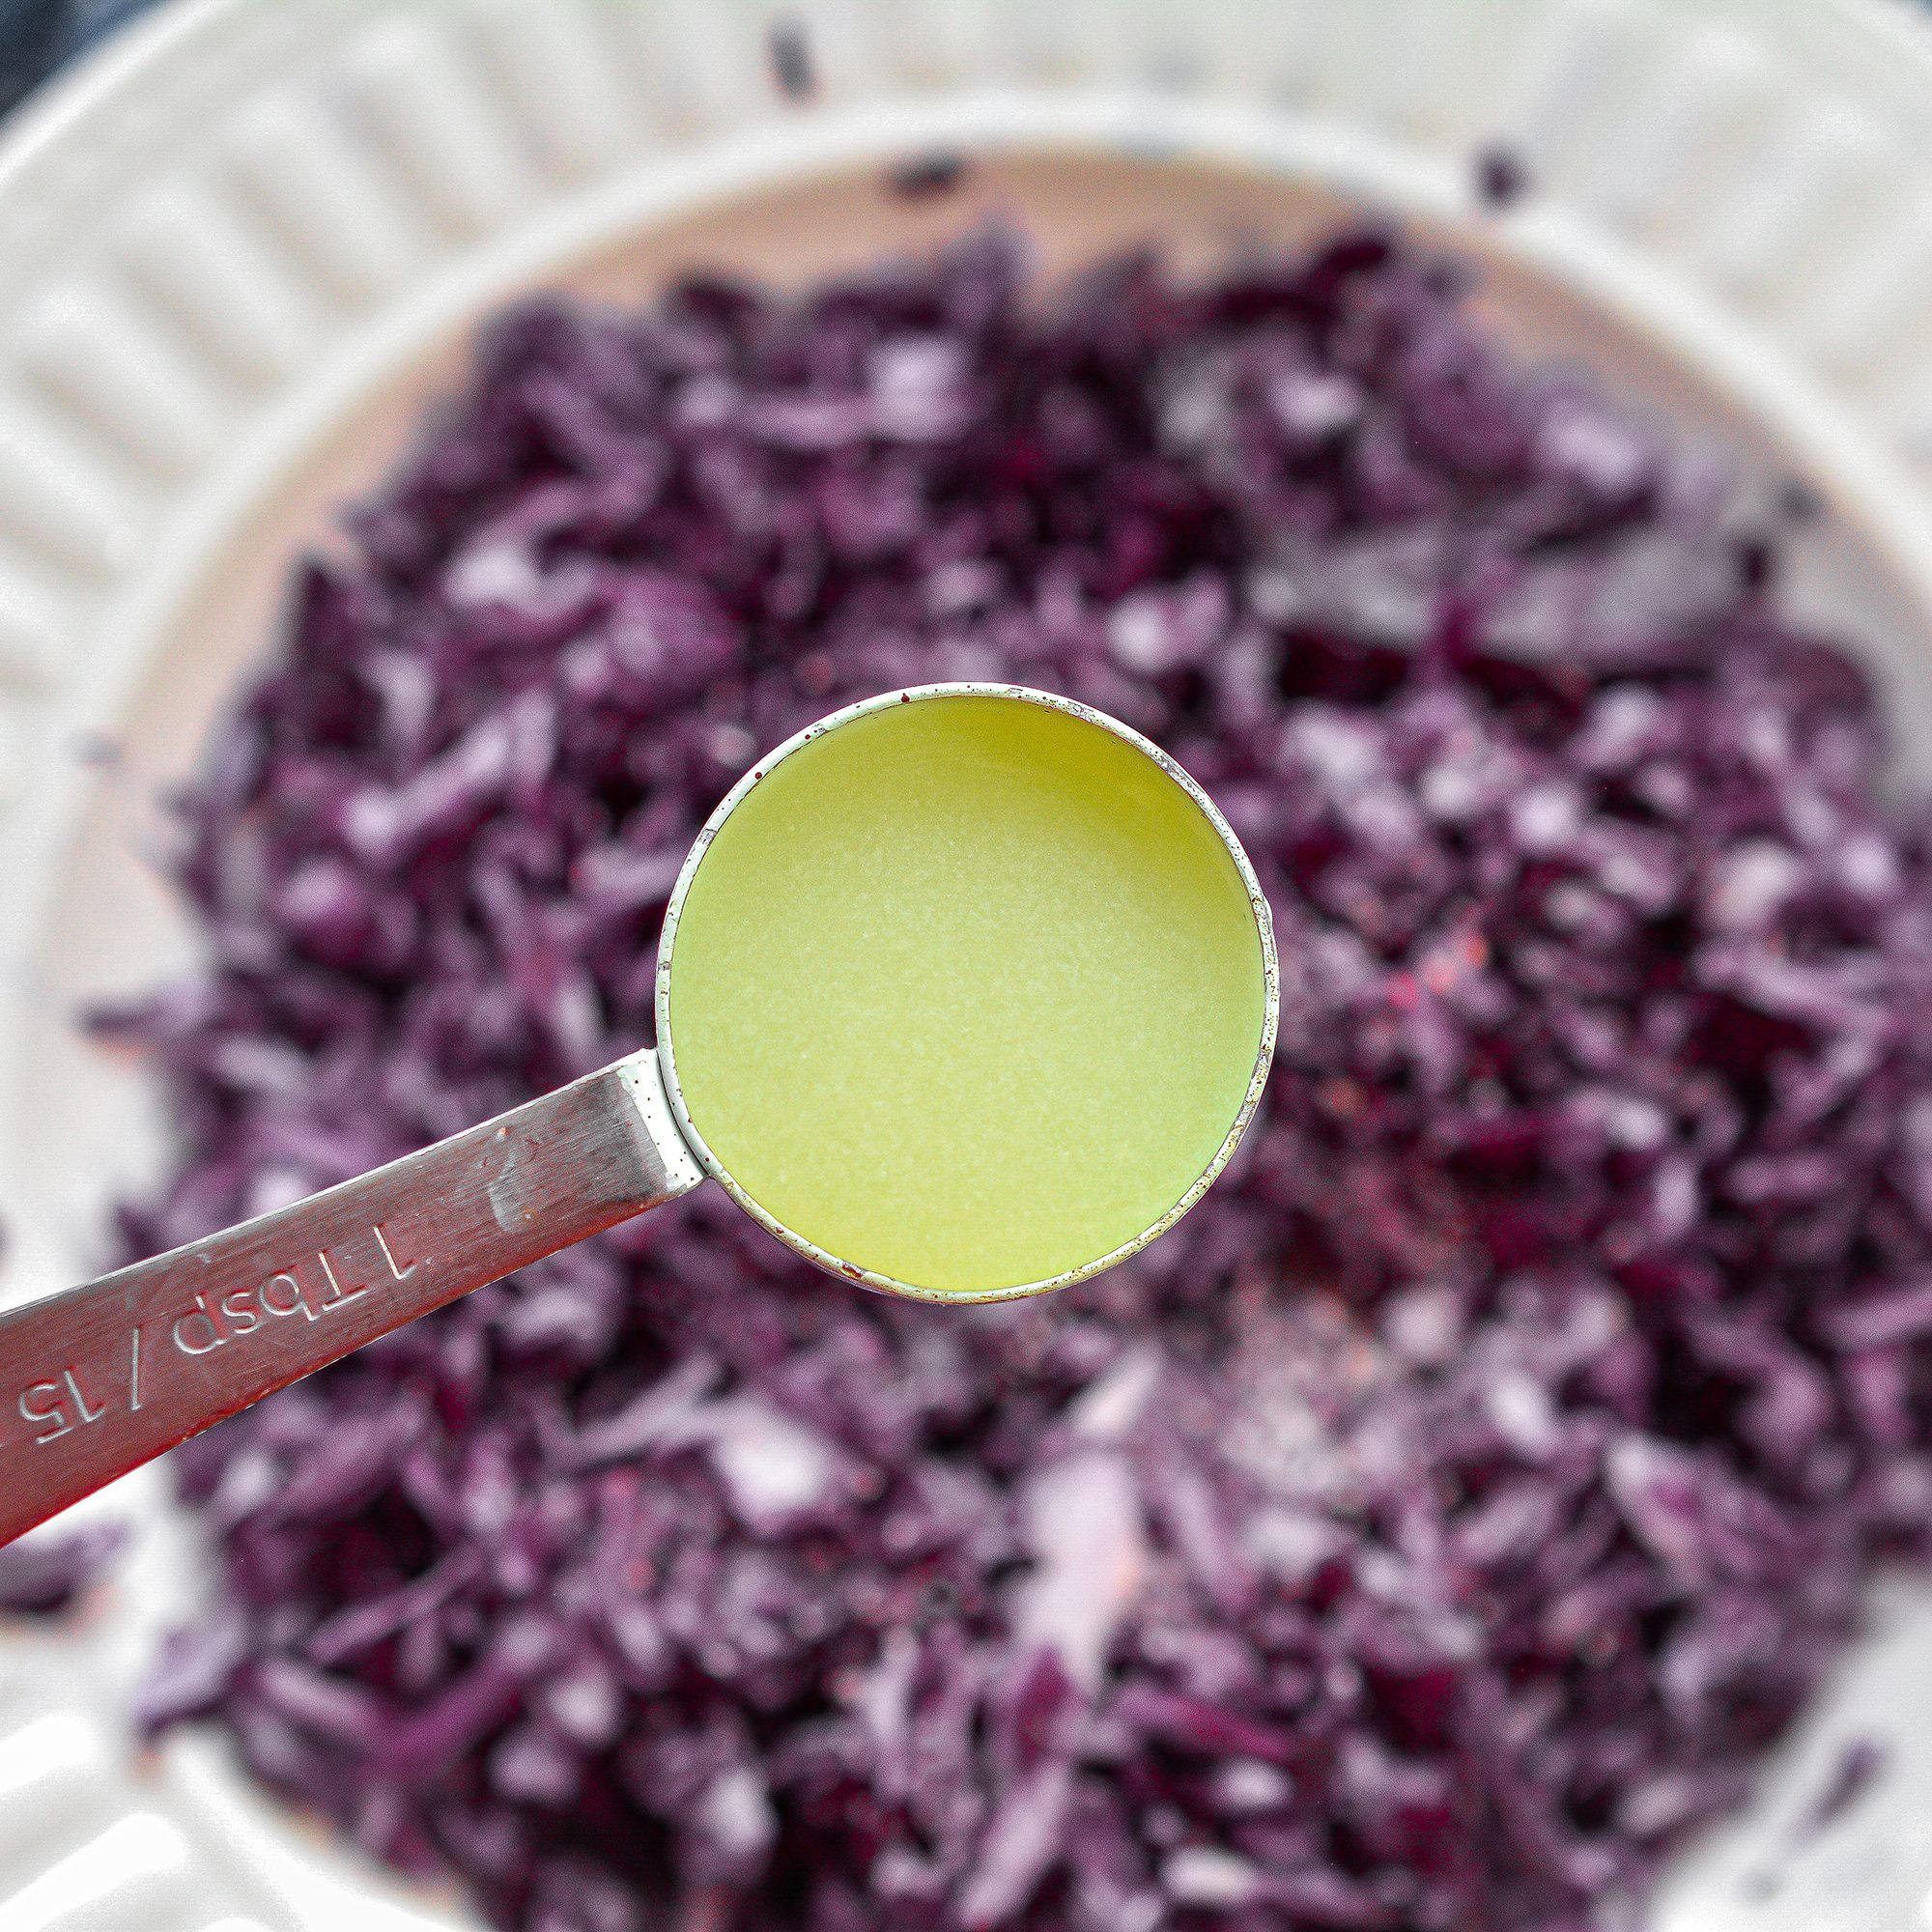 In a bowl, combine the shredded cabbage with a pinch of salt and 1 ½ Tbsp of lemon juice.